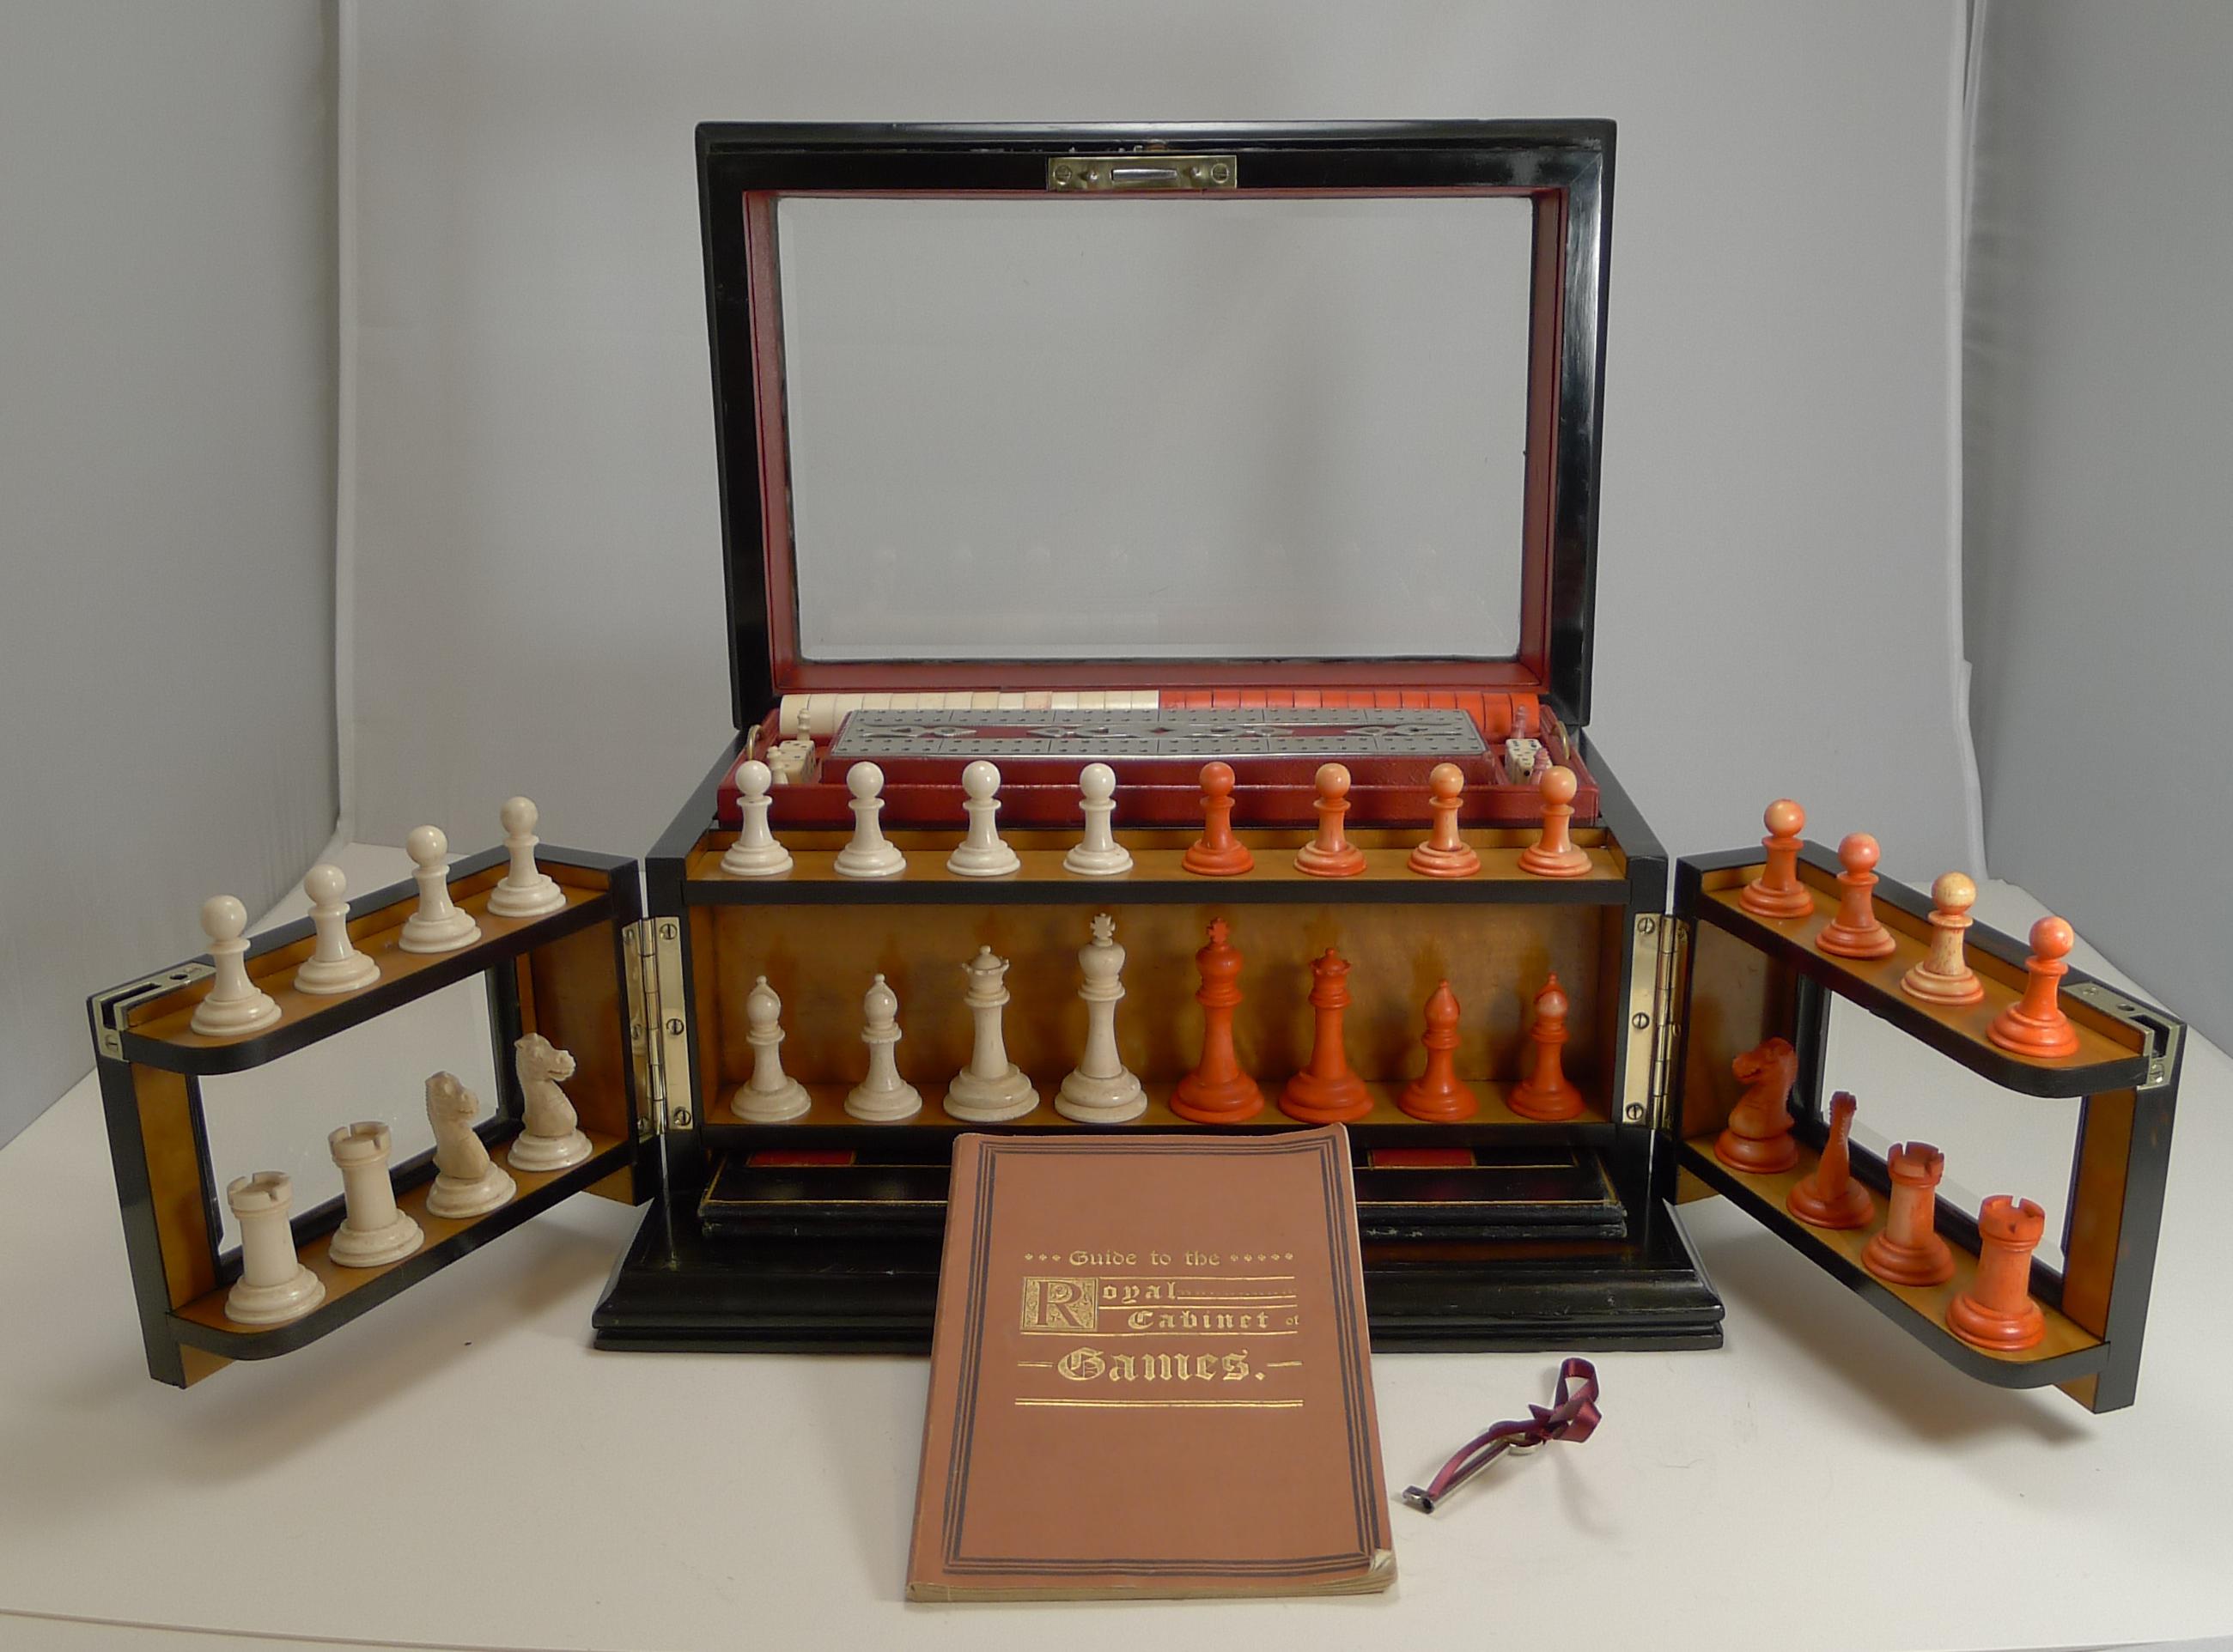 An exceptional glazed Coromandel games box, my favourite kind retaining the original bevelled glass panels to the top and front. The box retains both the original engraved inlaid brass plaque and the original instruction book 